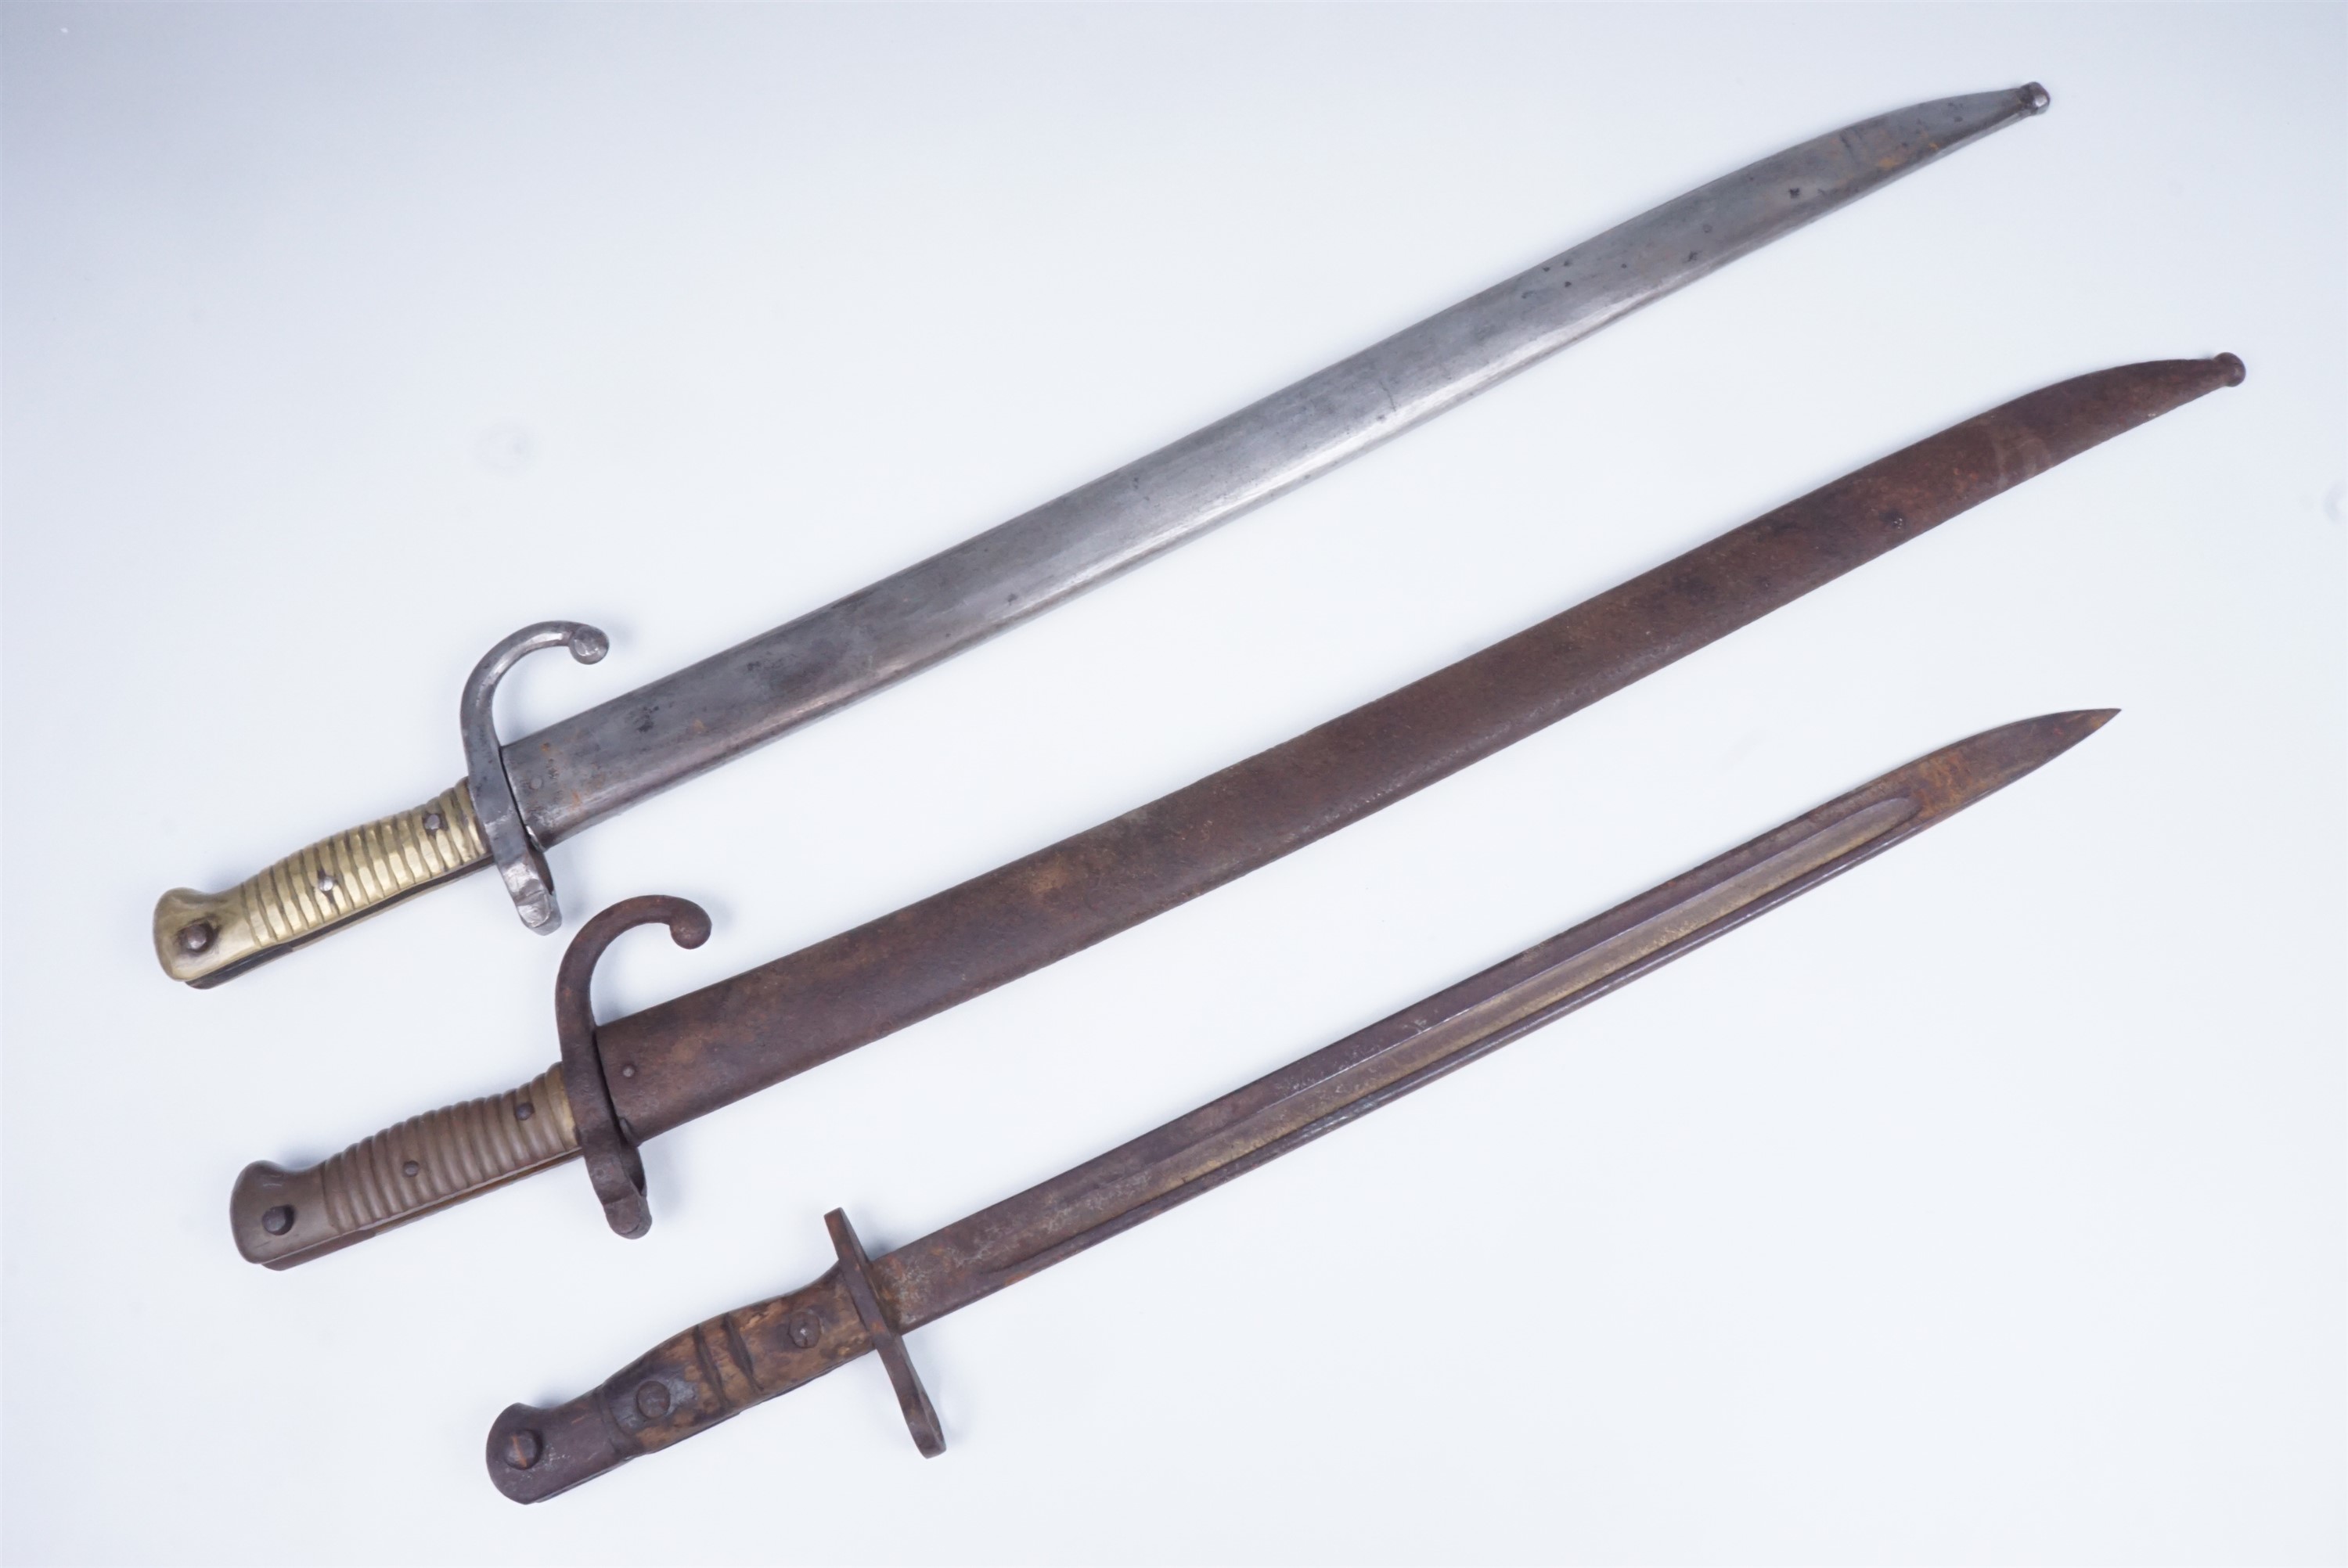 Two French Mle 1866 bayonets together with a British Pattern 1913 bayonet (lacking scabbard)